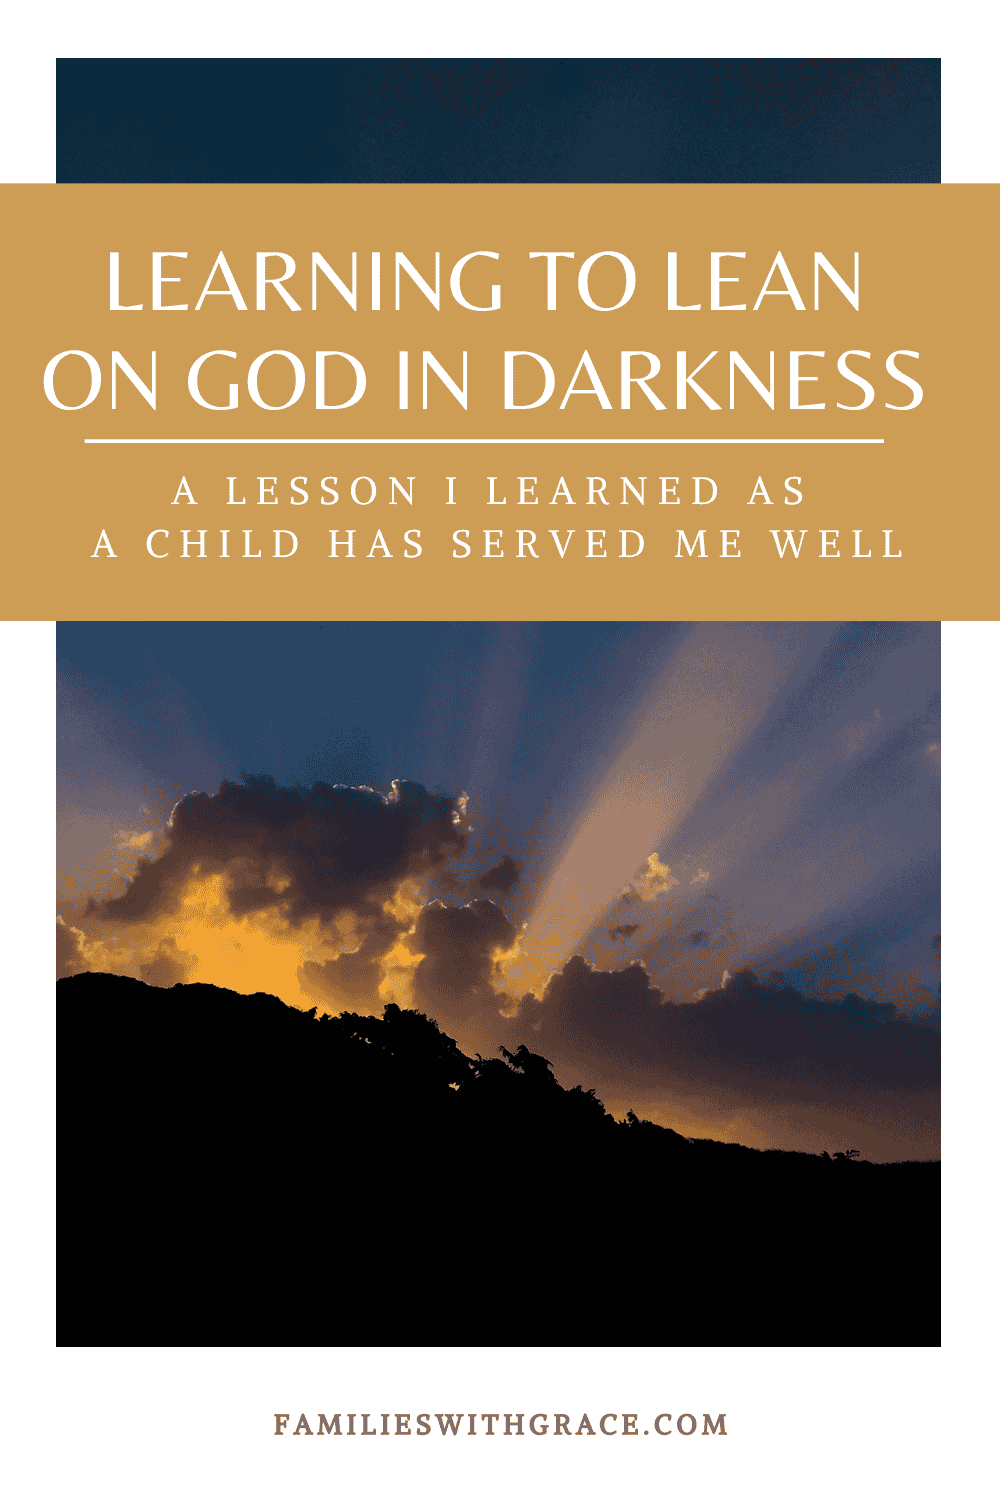 Learning to lean on God in darkness